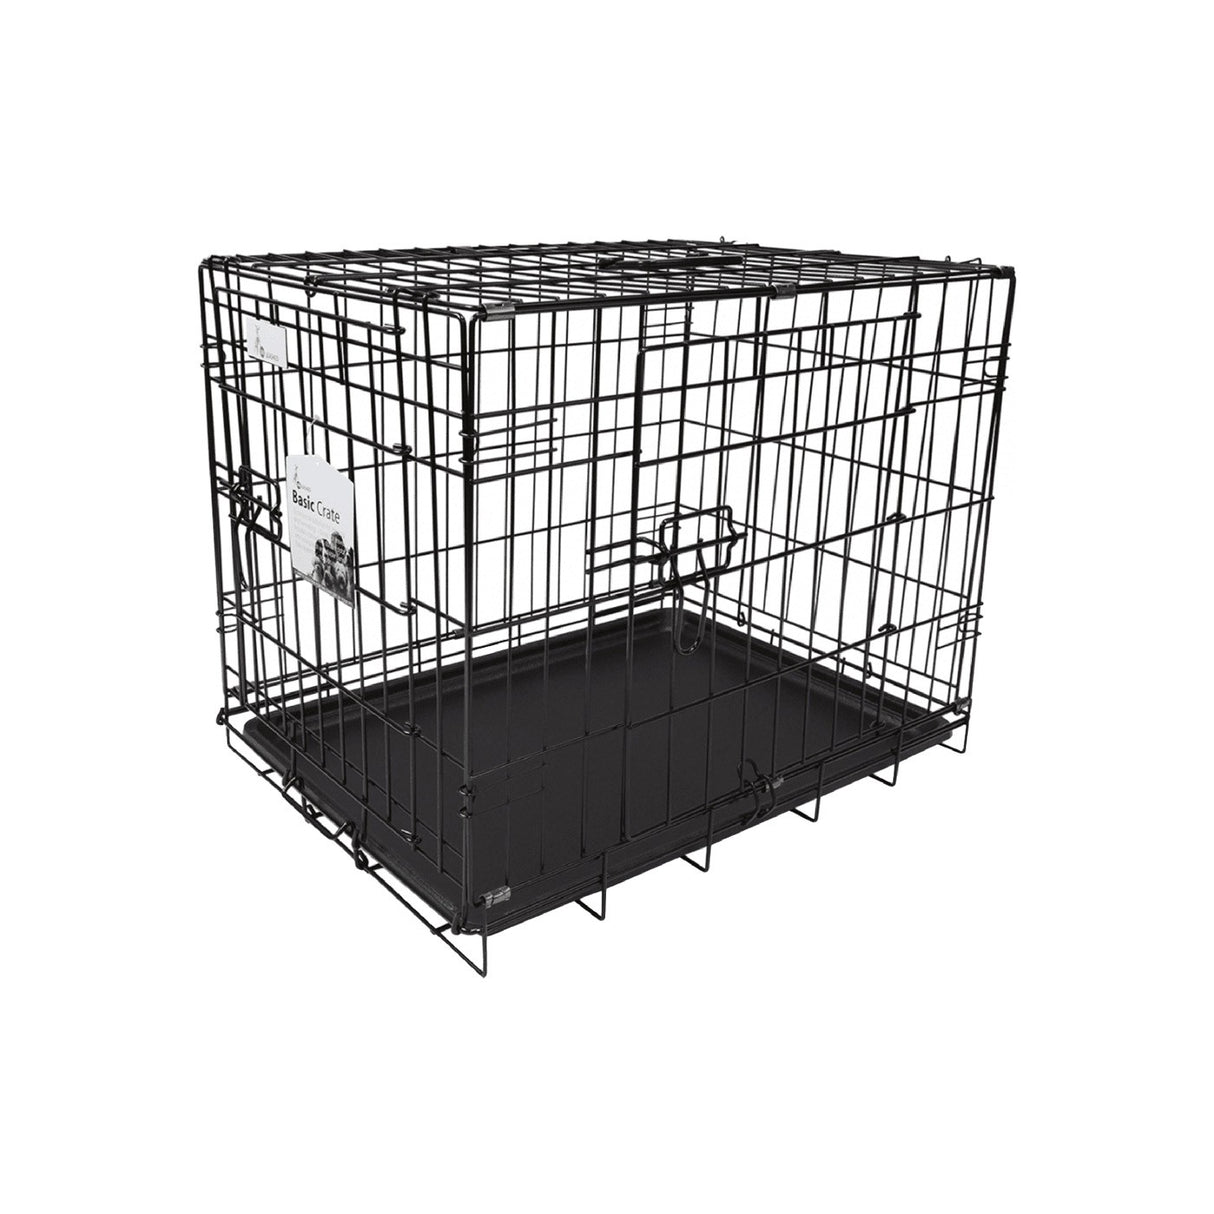 Unleashed Basic Double Door Dog Crate 19 in.